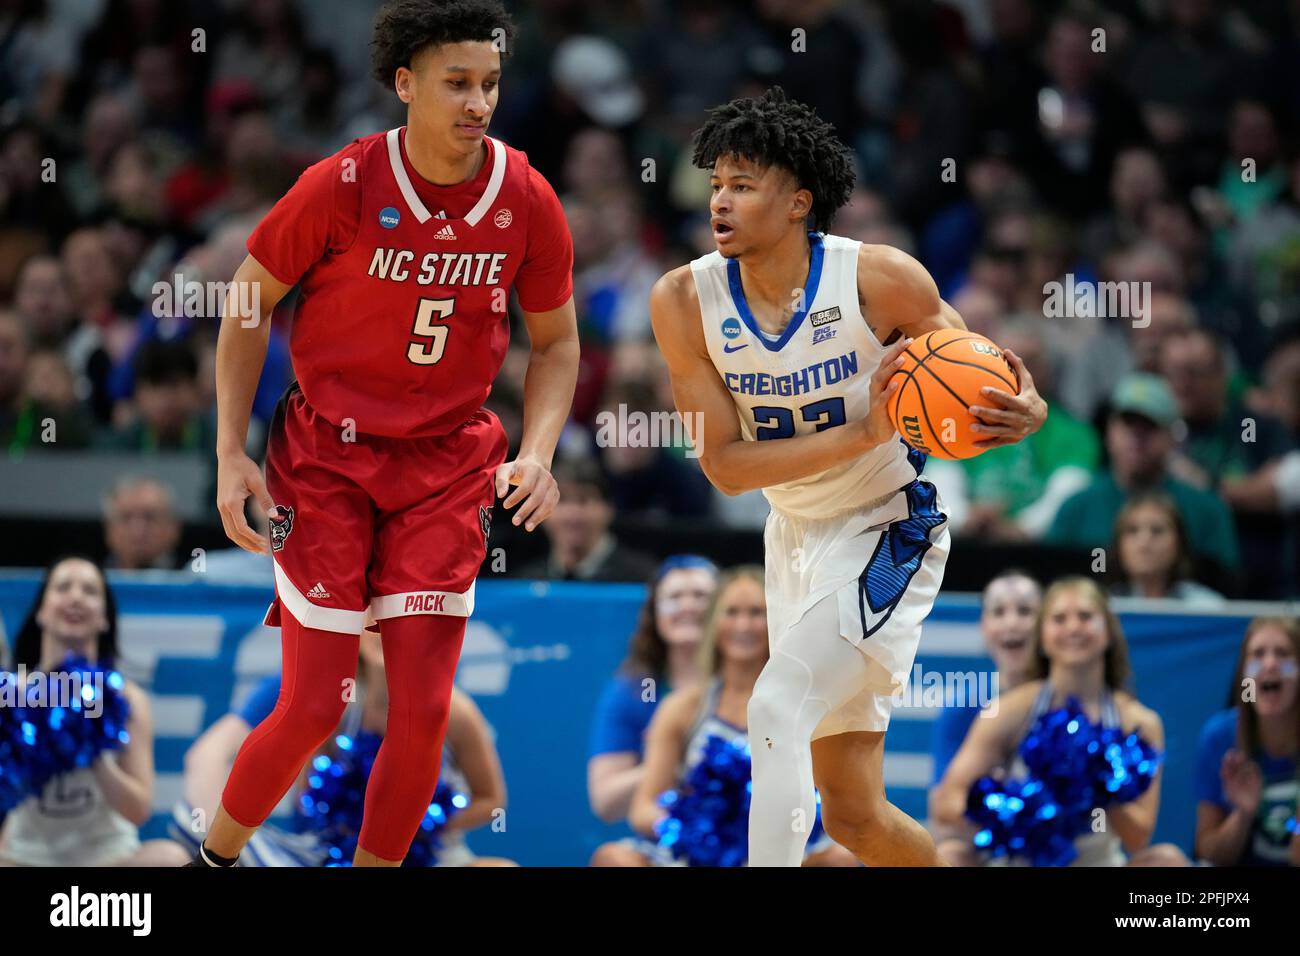 Creighton guard Trey Alexander, right, looks to pass the ball as North  Carolina State guard Jack Clark defends in the first half of a first-round  college basketball game in the men's NCAA